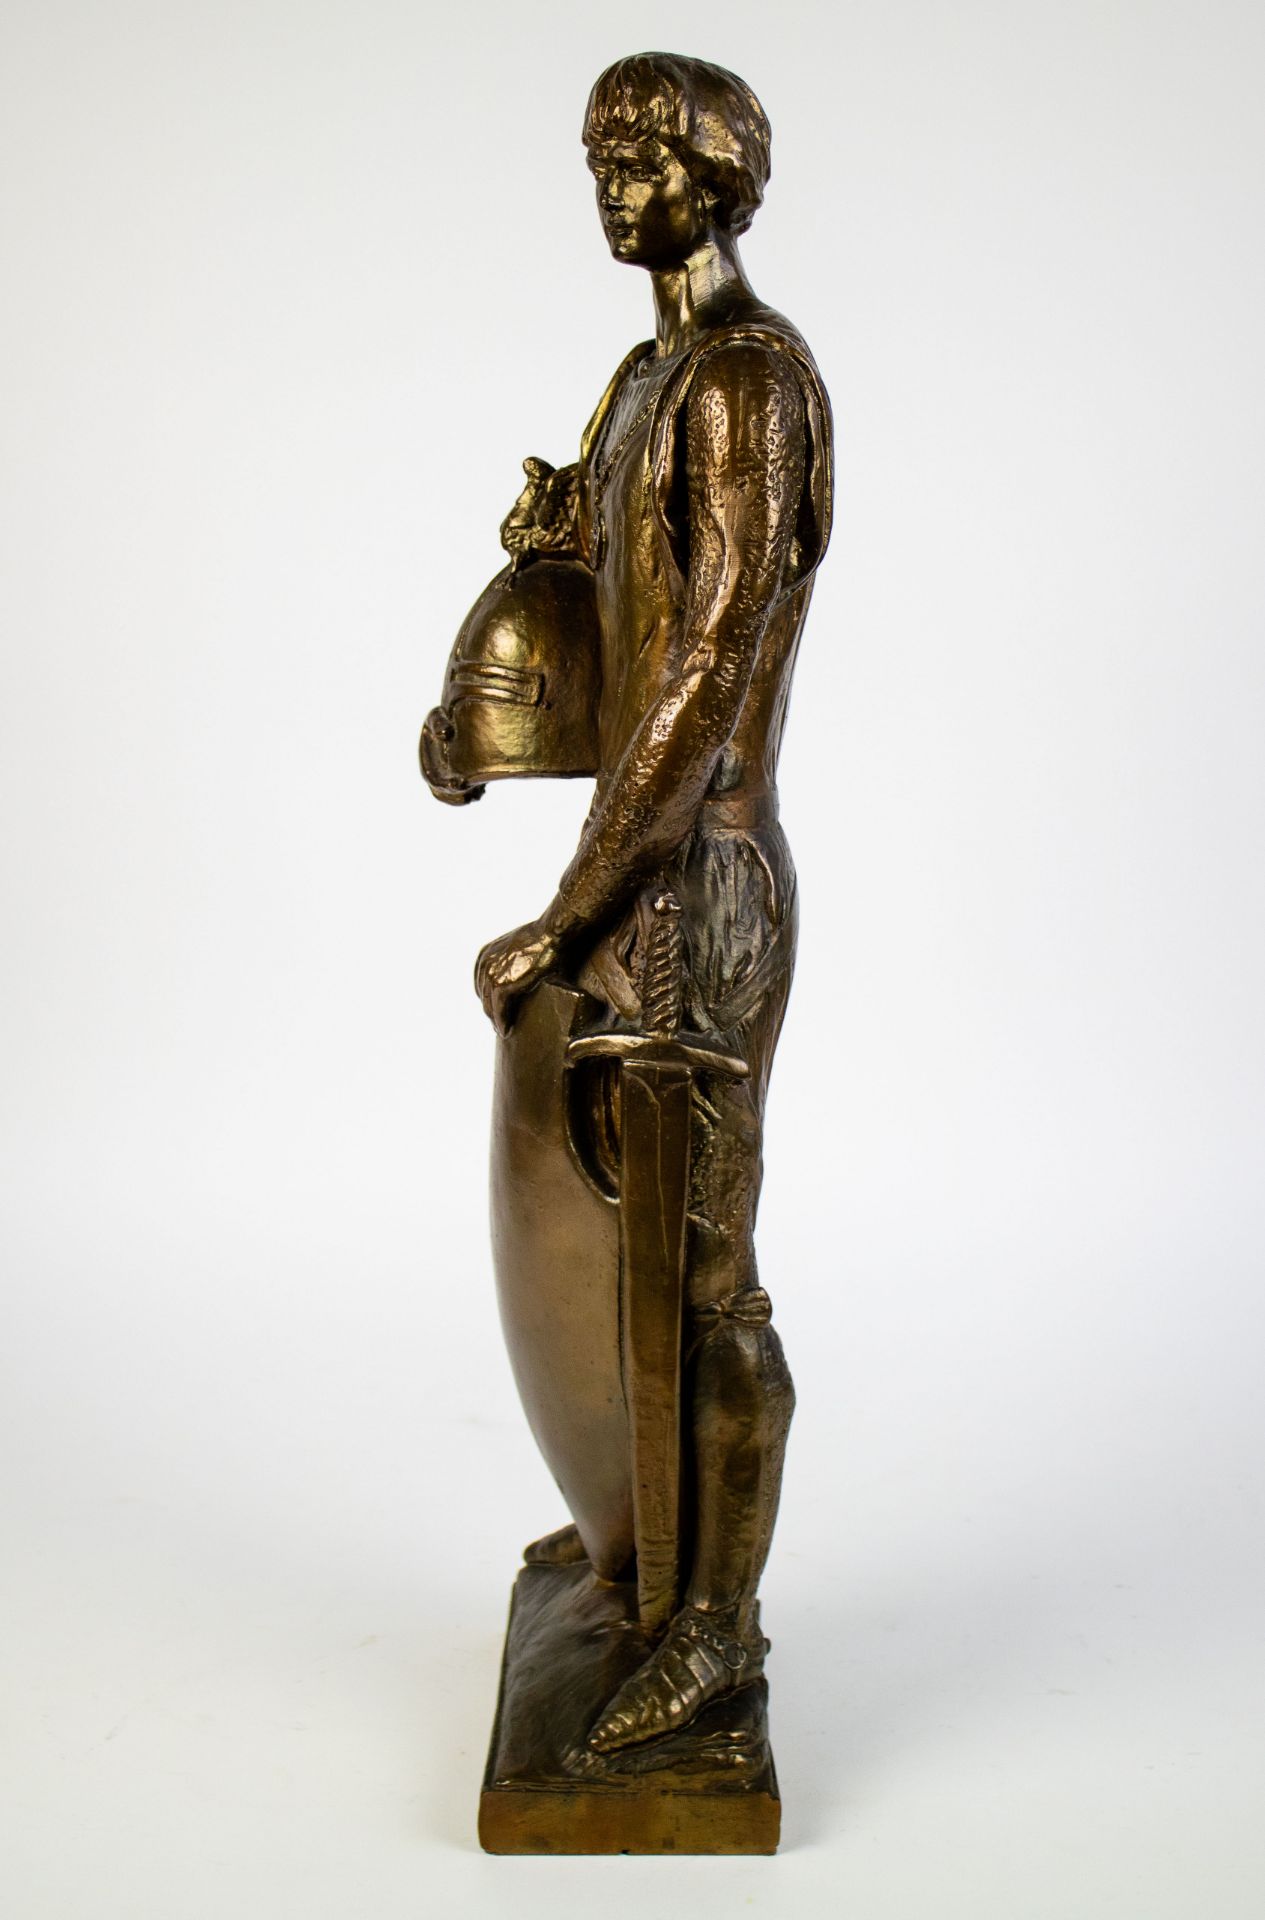 Gilded statue of a Knight with helmet and shield - Image 2 of 6